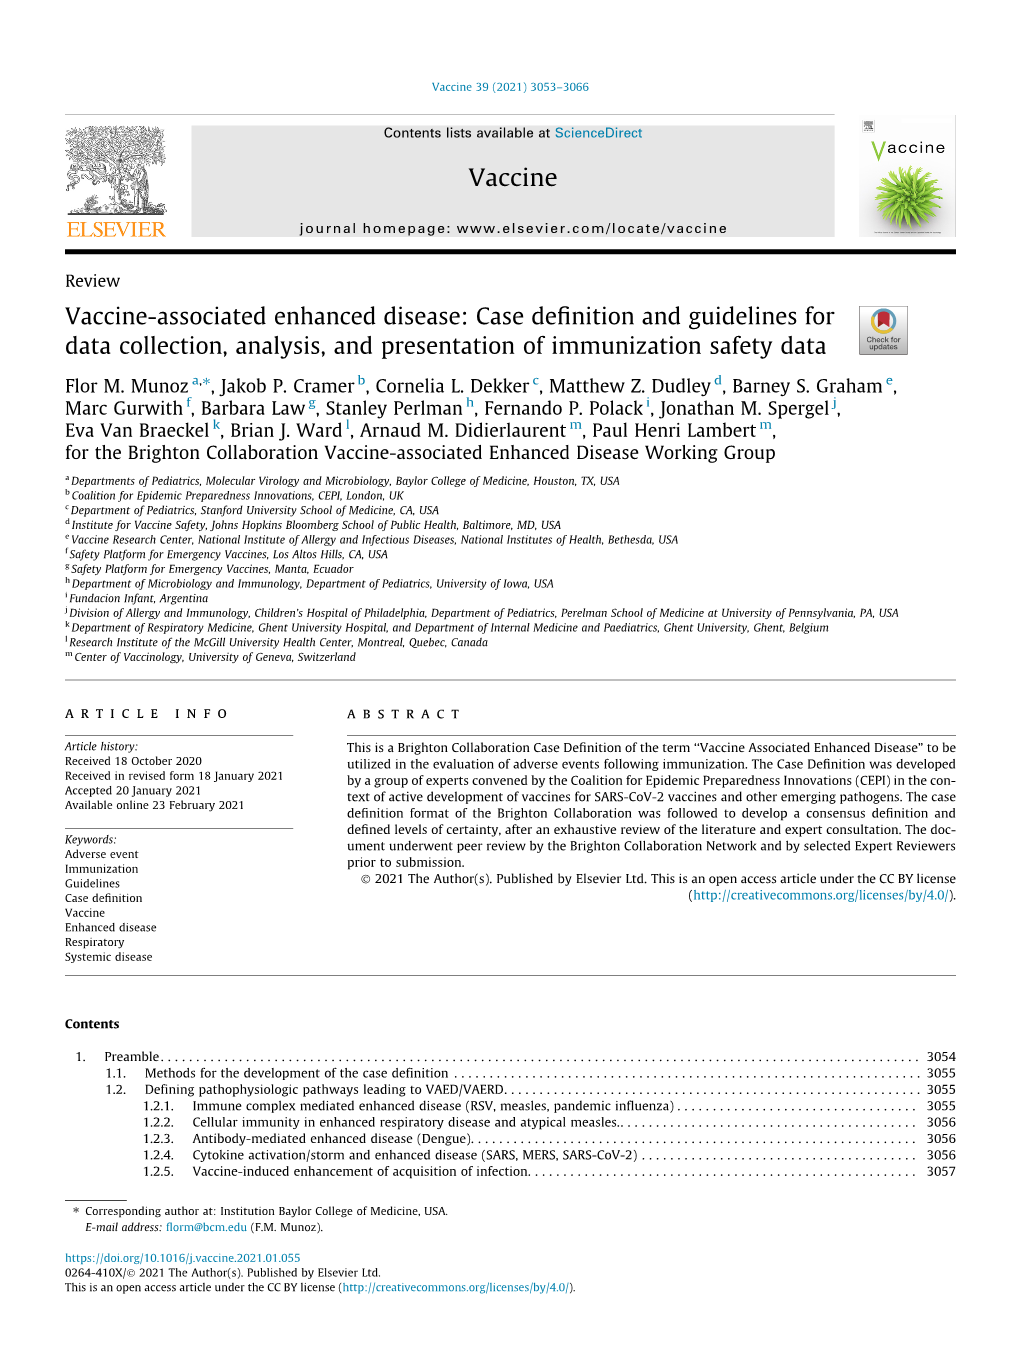 Vaccine-Associated Enhanced Disease: Case Deﬁnition and Guidelines for Data Collection, Analysis, and Presentation of Immunization Safety Data ⇑ Flor M